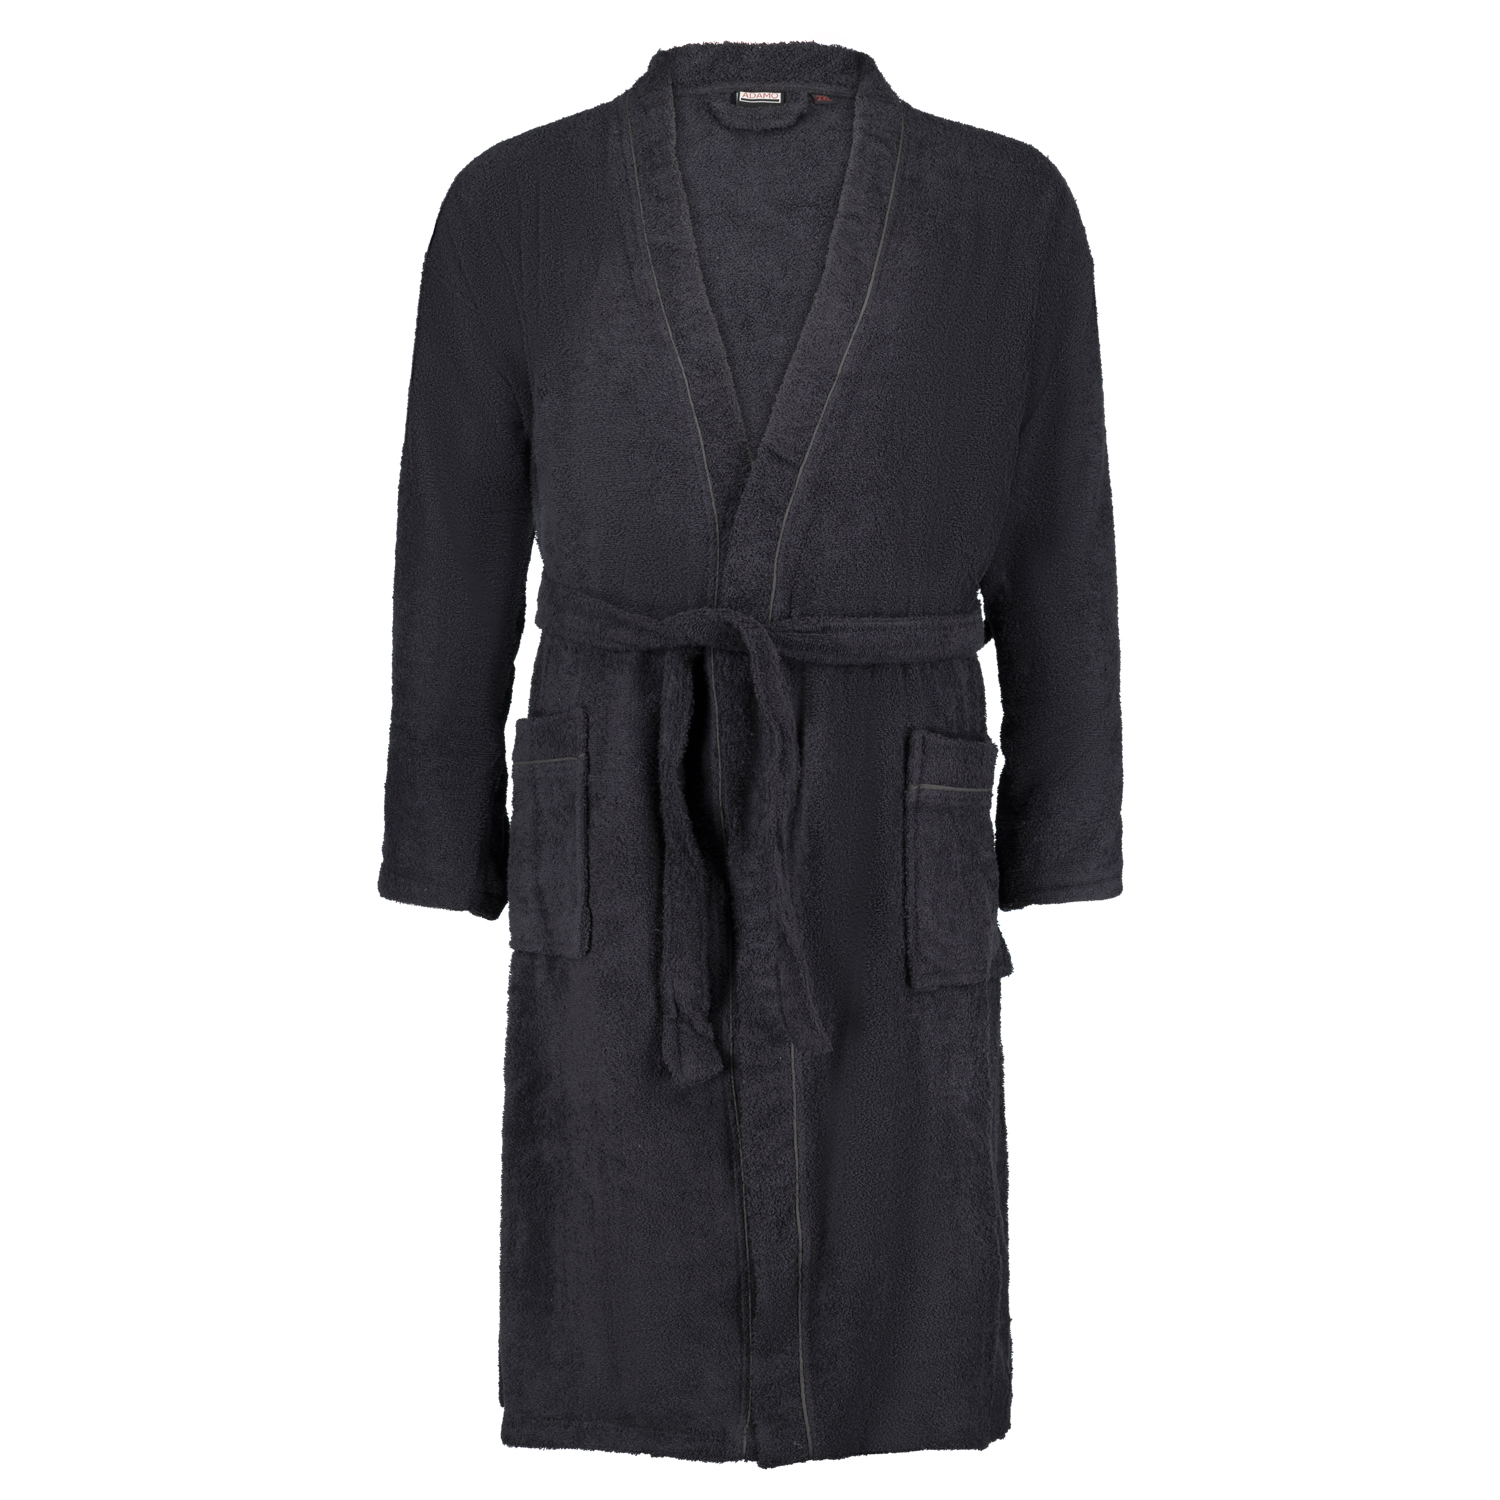 Bathrobe for men in black series JOEY by ADAMO up to oversize 12XL